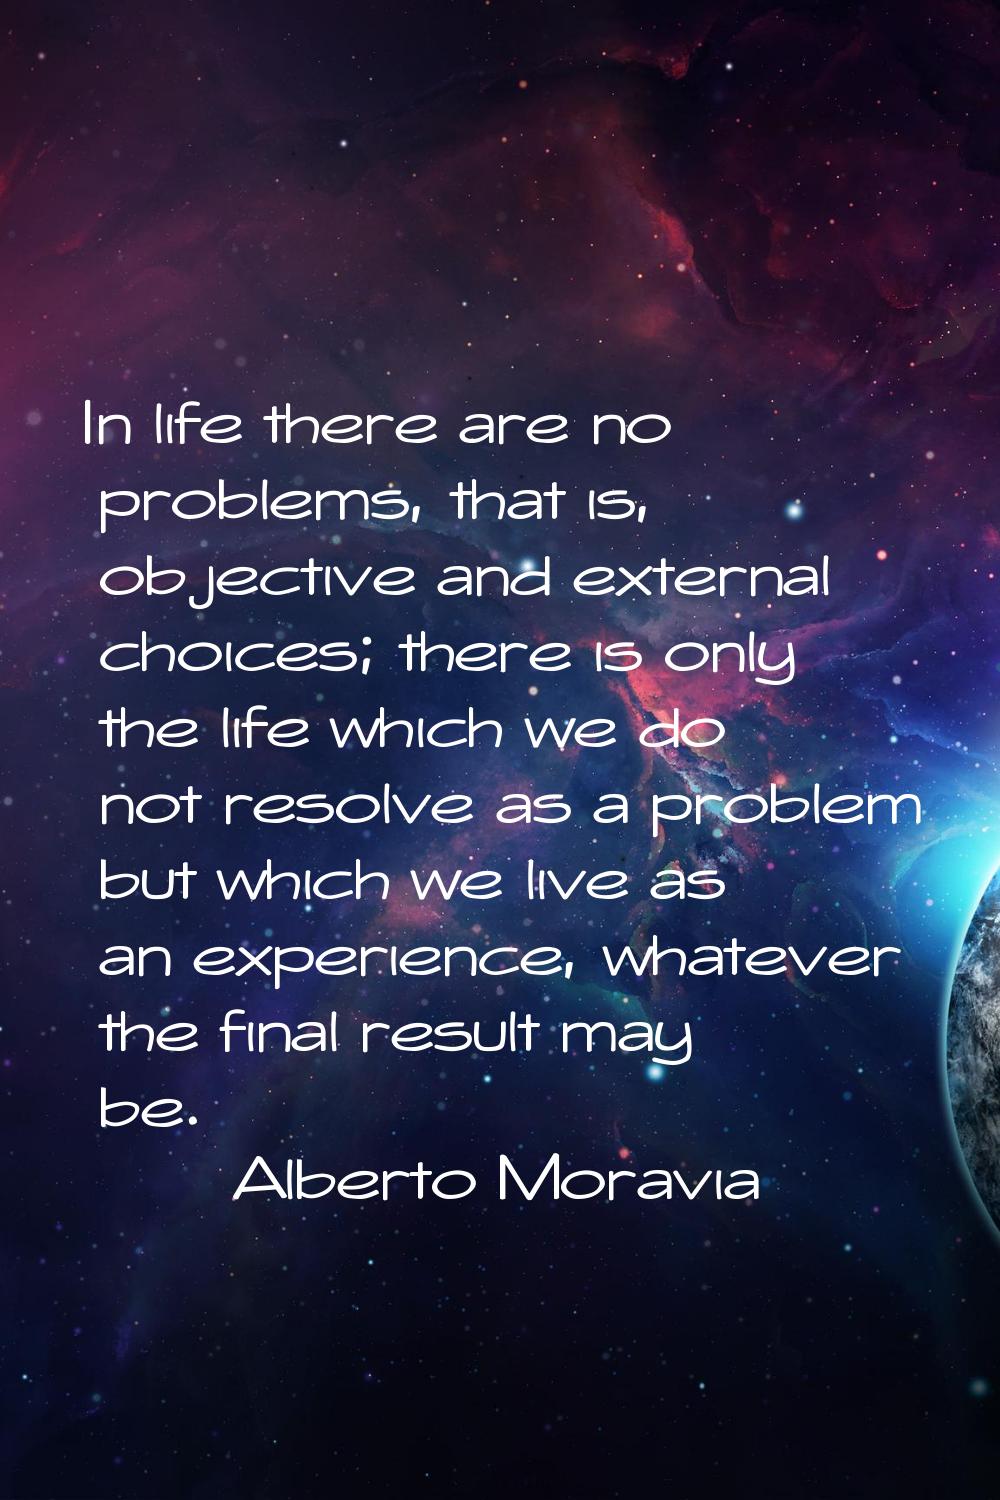 In life there are no problems, that is, objective and external choices; there is only the life whic